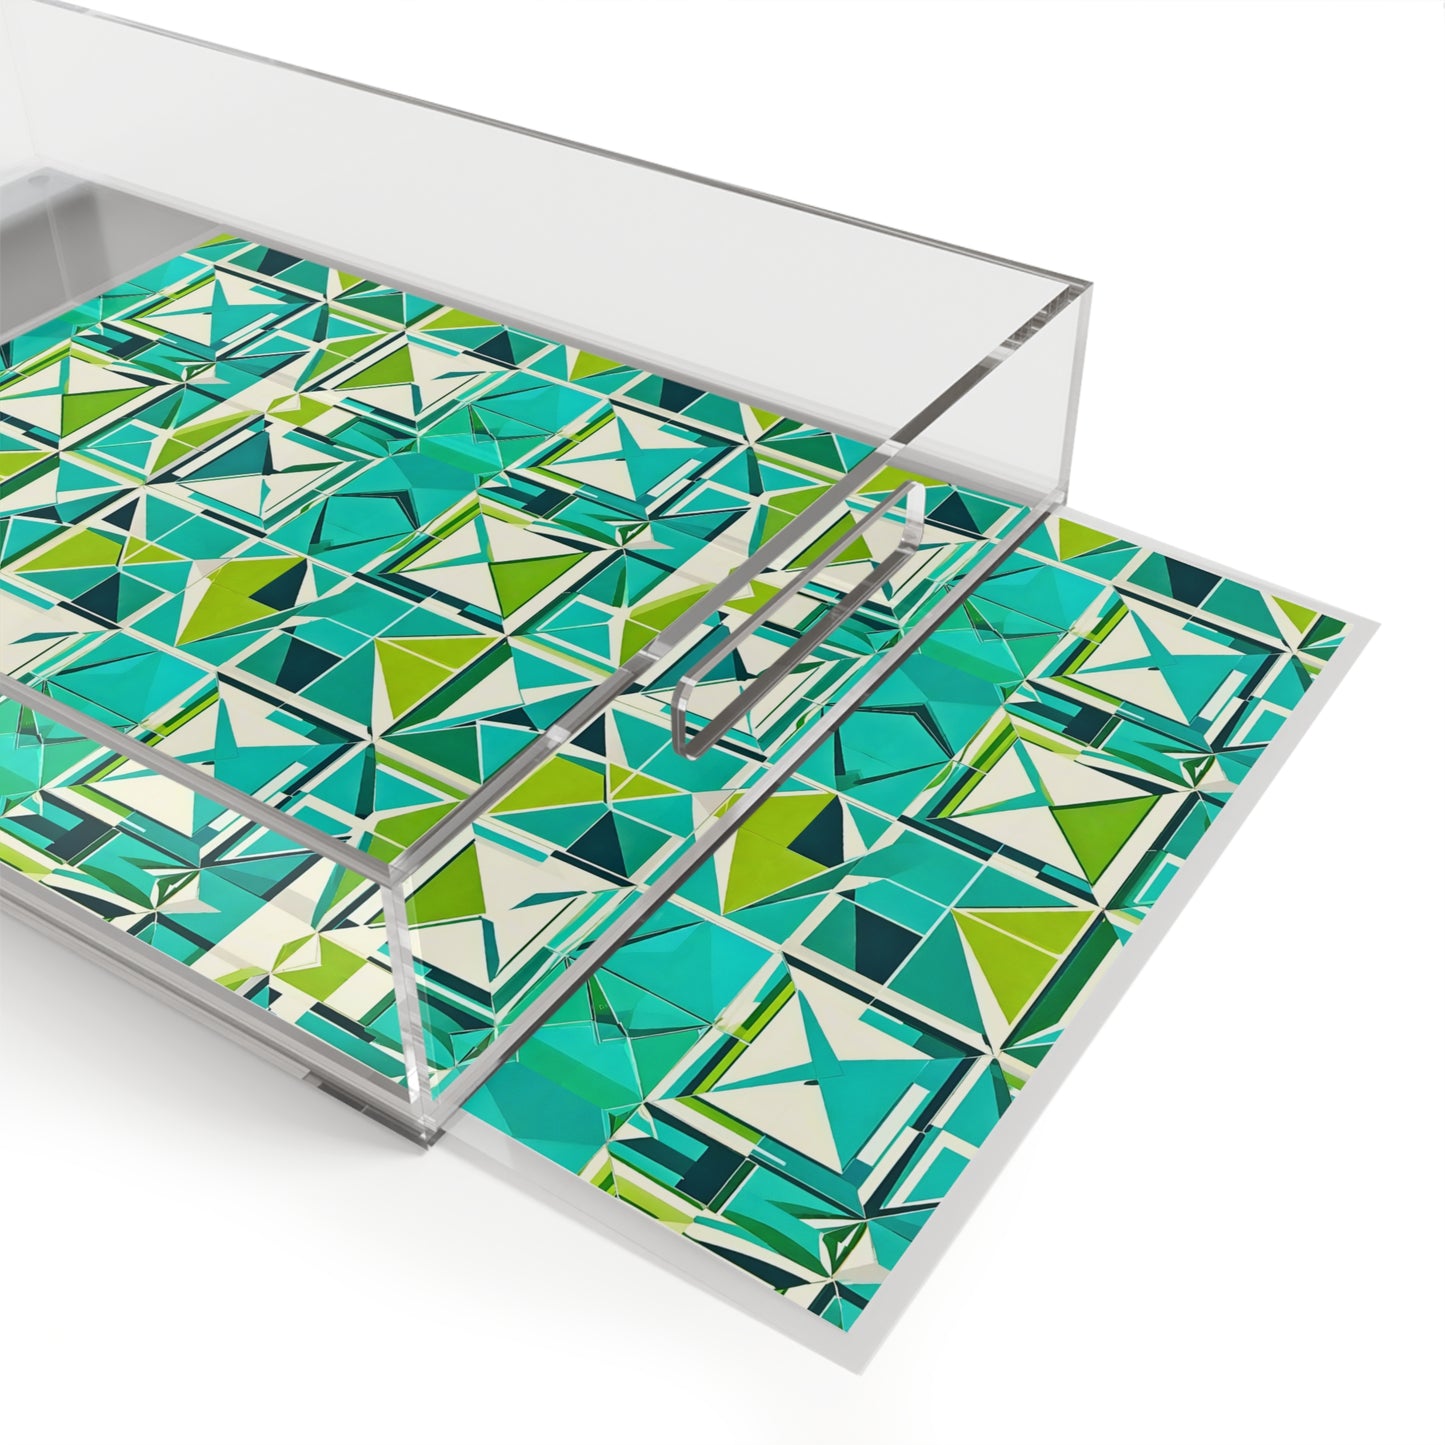 Cancun Vacation Midcentury Modern Tile Turquoise and Green Geometric Pattern Patio Summertime Outdoor Party Acrylic Serving Tray